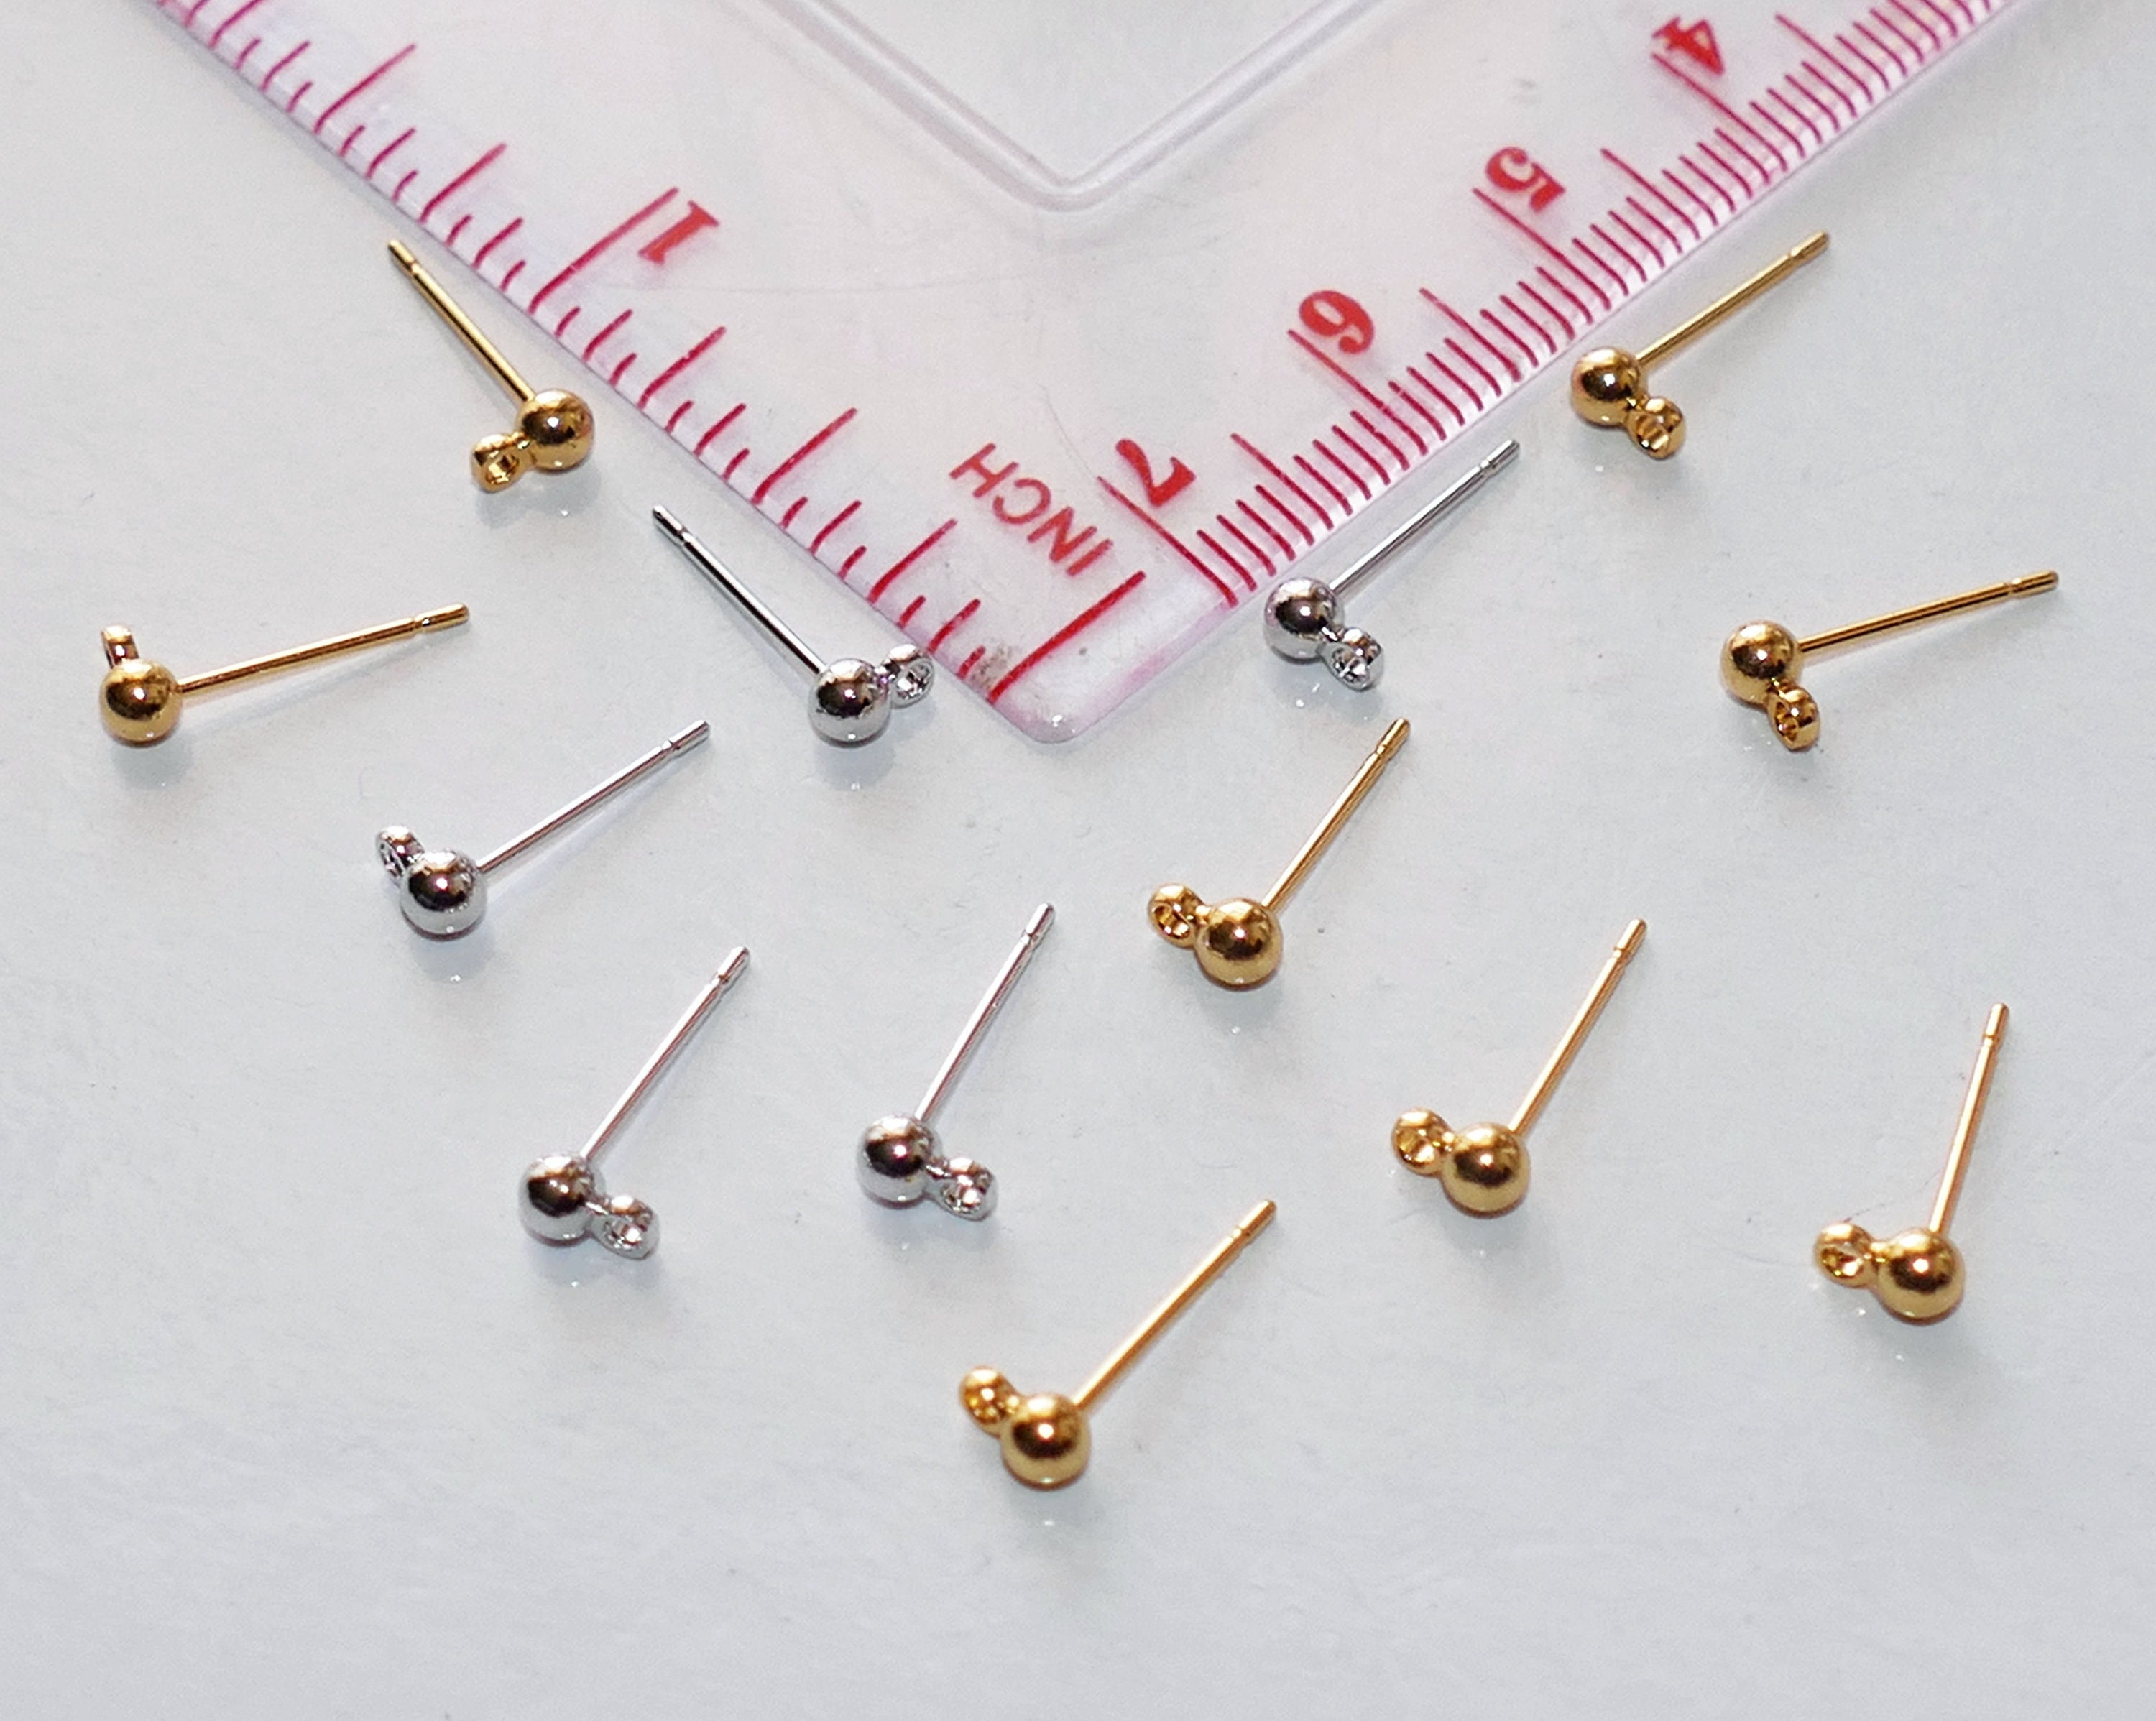 10x Stainless Steel Ball Earring Stud With Open Loop, 3mm Hypoallergenic  Silver Tone Ball Head Pins for Earring Making F197 